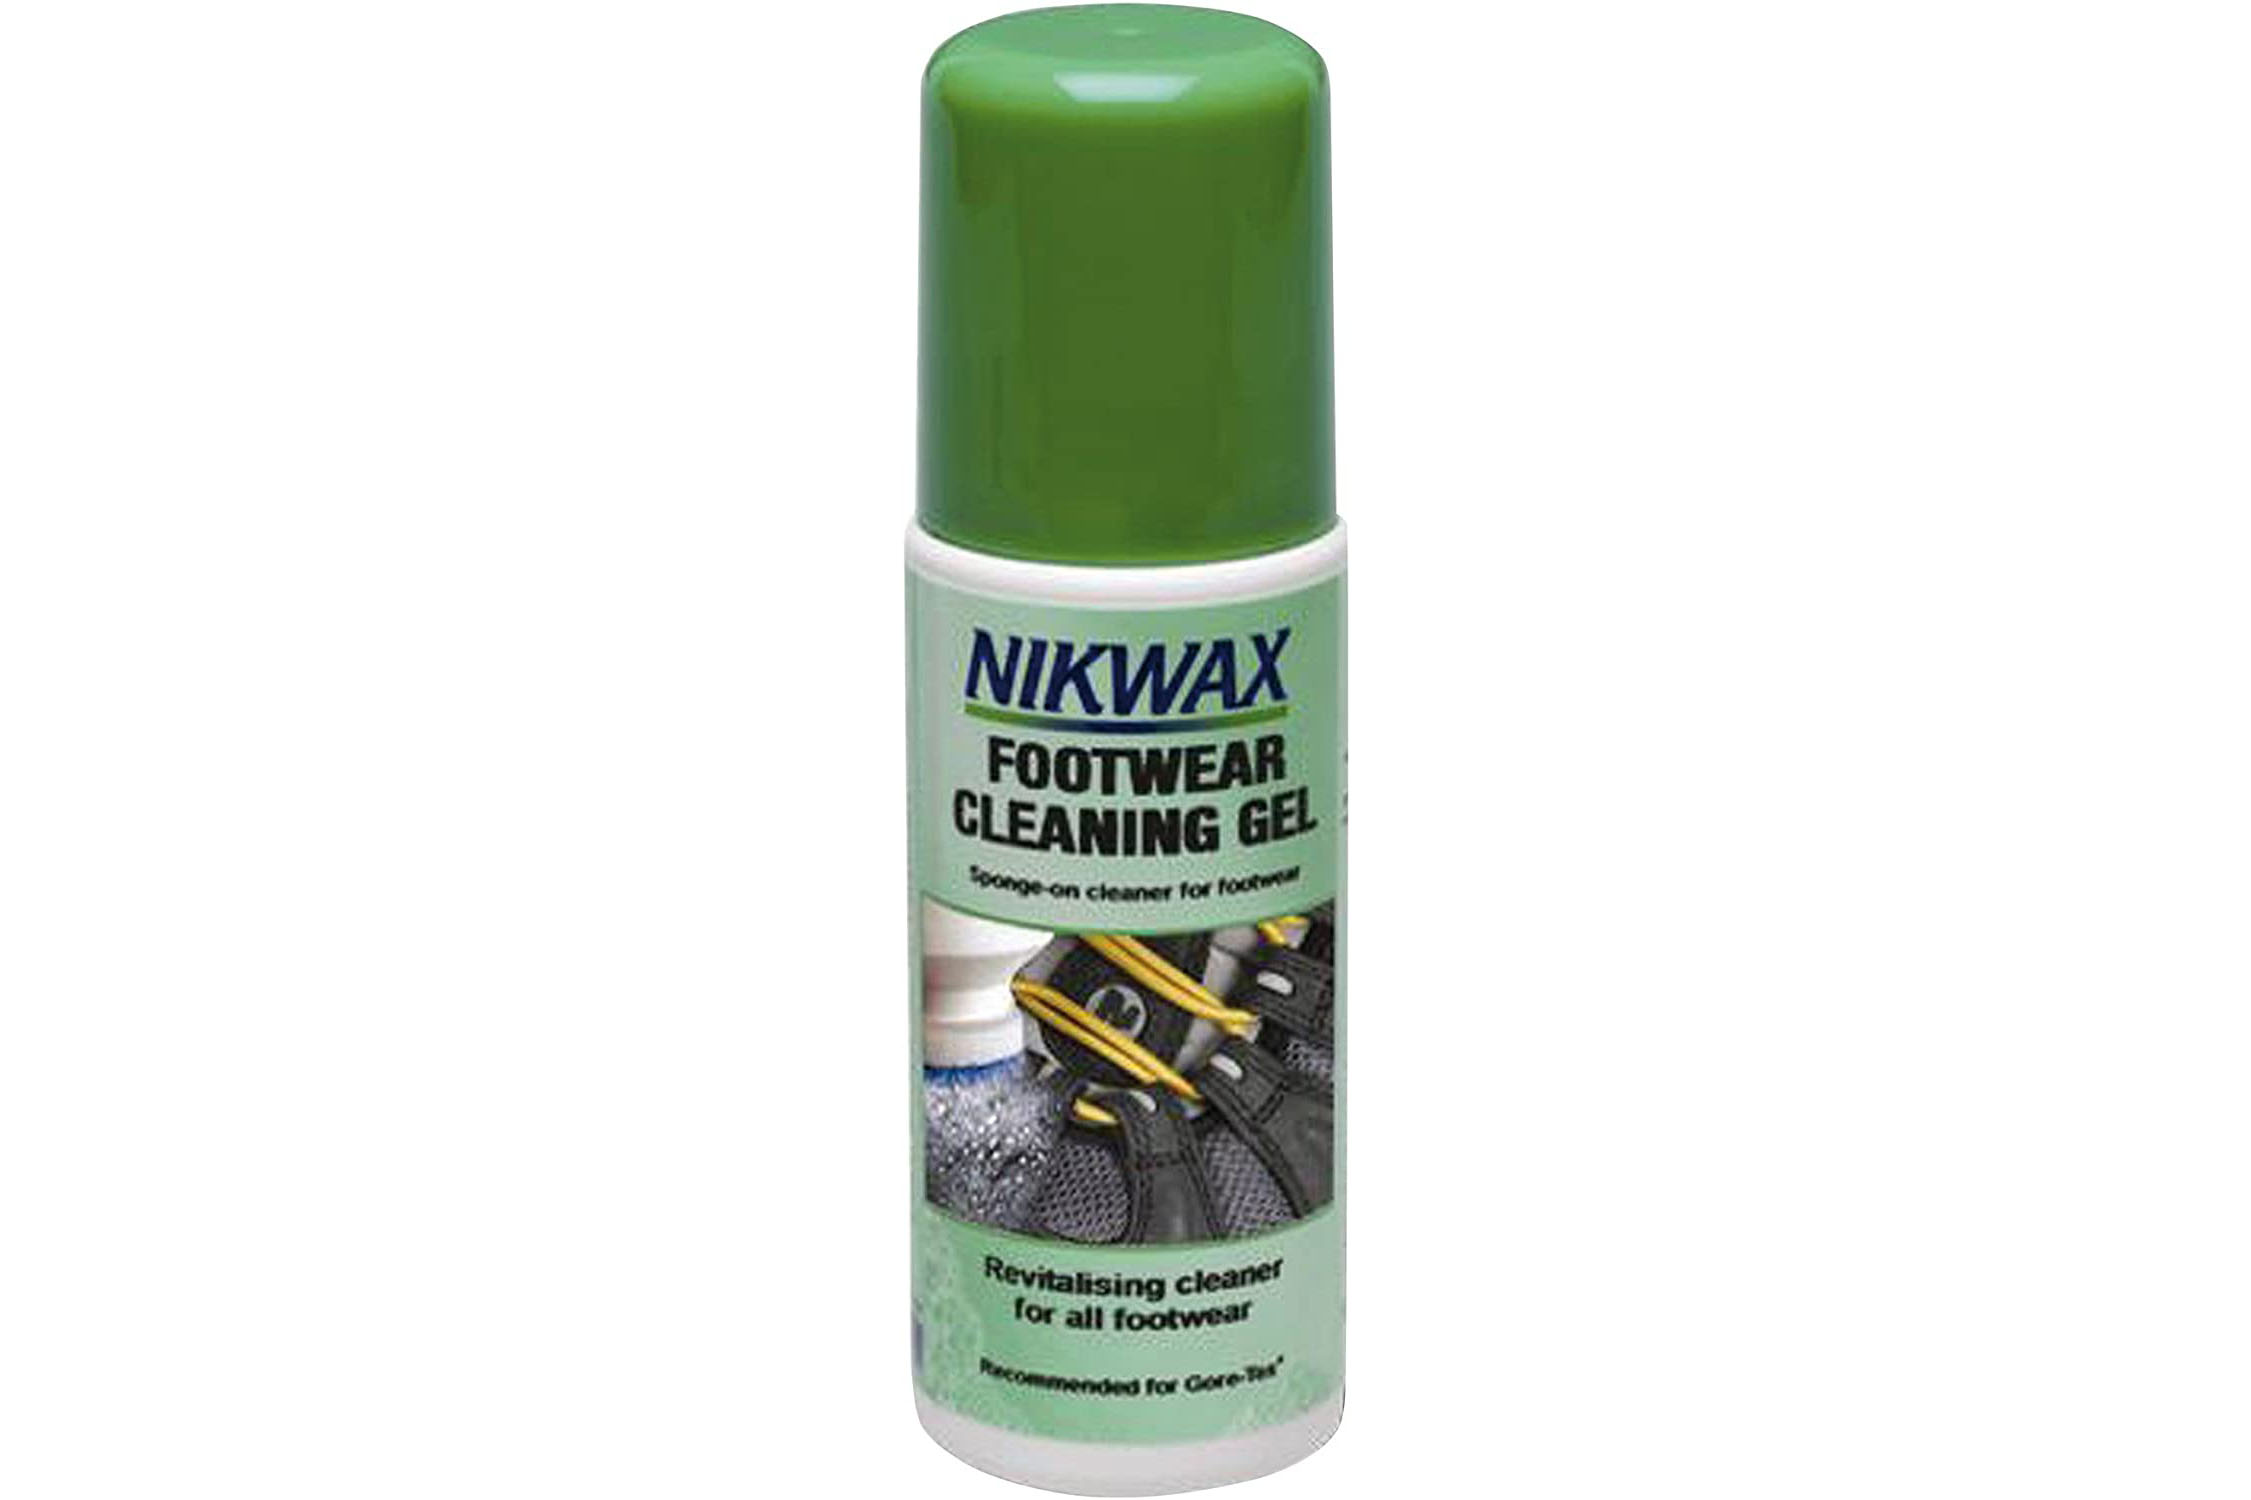 Use Nikwax Footwear CLeaning Gel to keep shoes and boots clean and restore DWR coating.